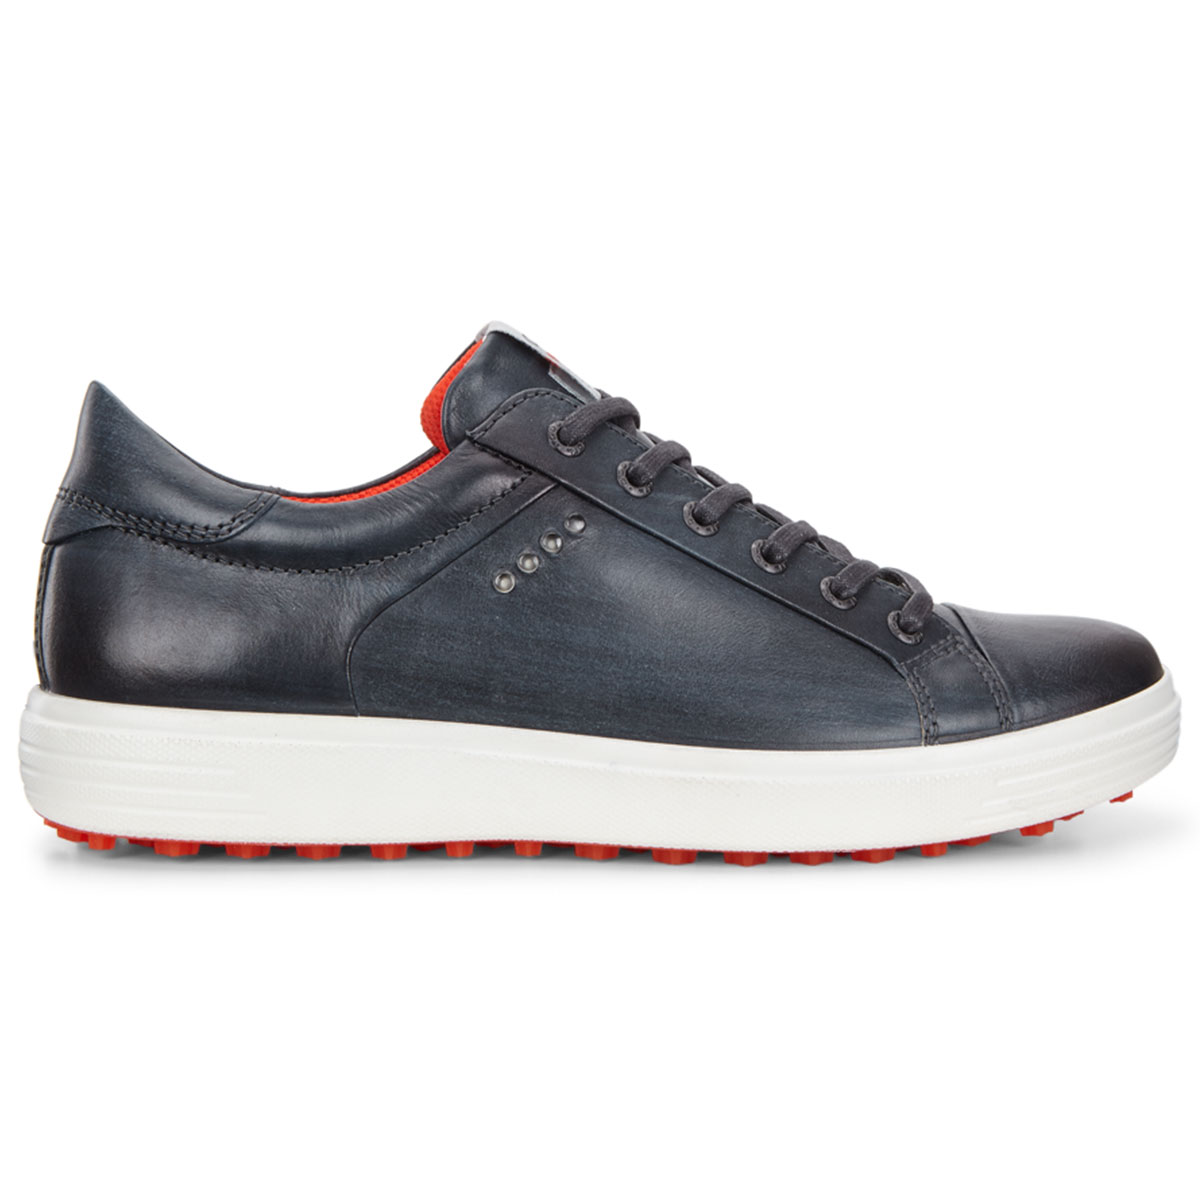 Ecco Mens Casual Hybrid Hydromax Waterproof Leather Spikeless Golf ...